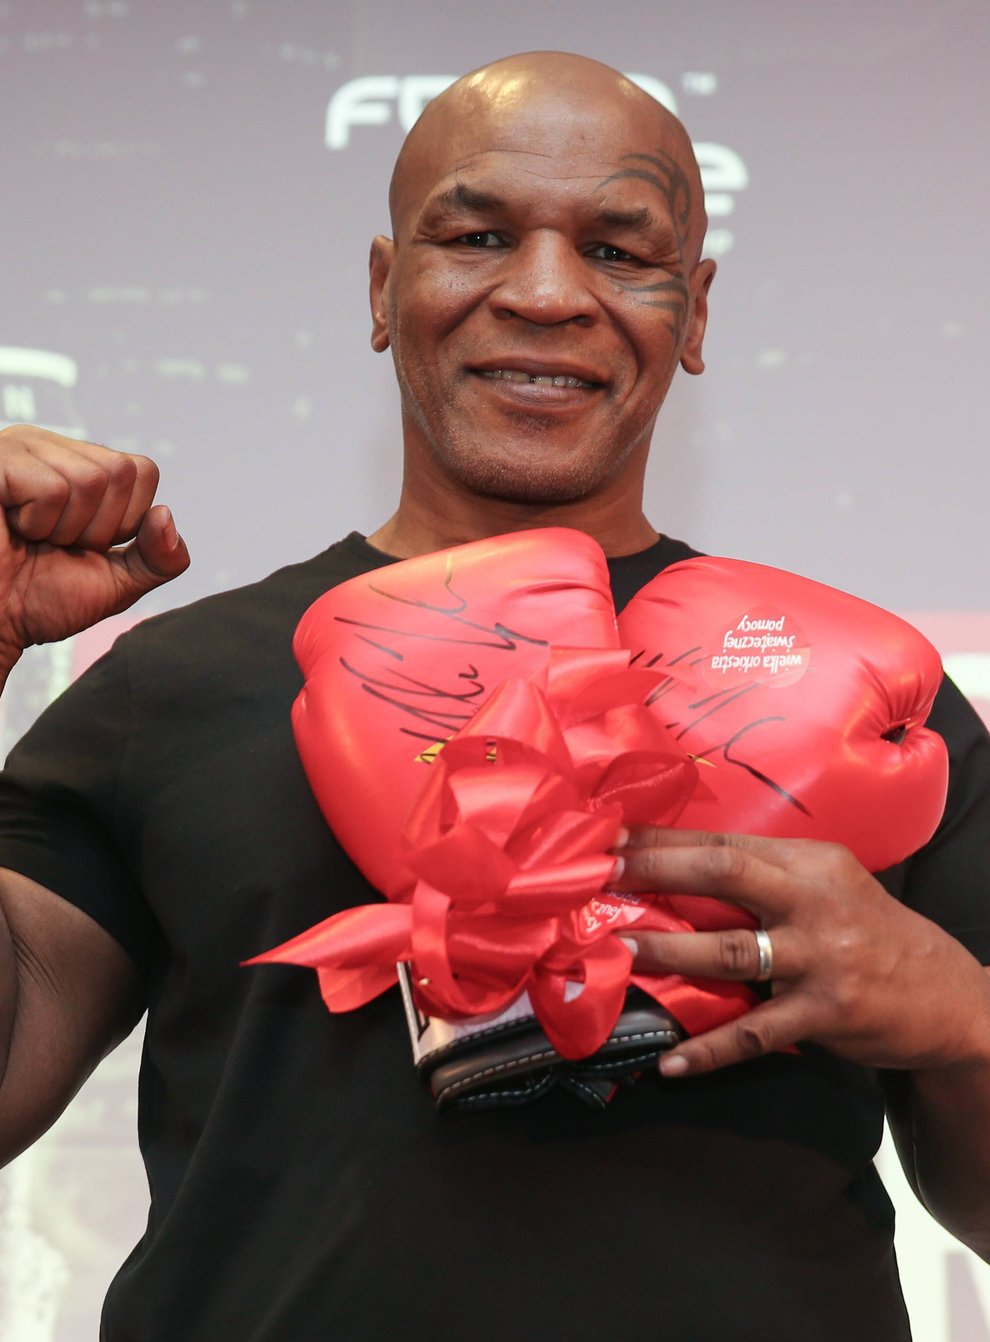 Warren spoke about how Tyson once punched him after a squabble over some jewellery